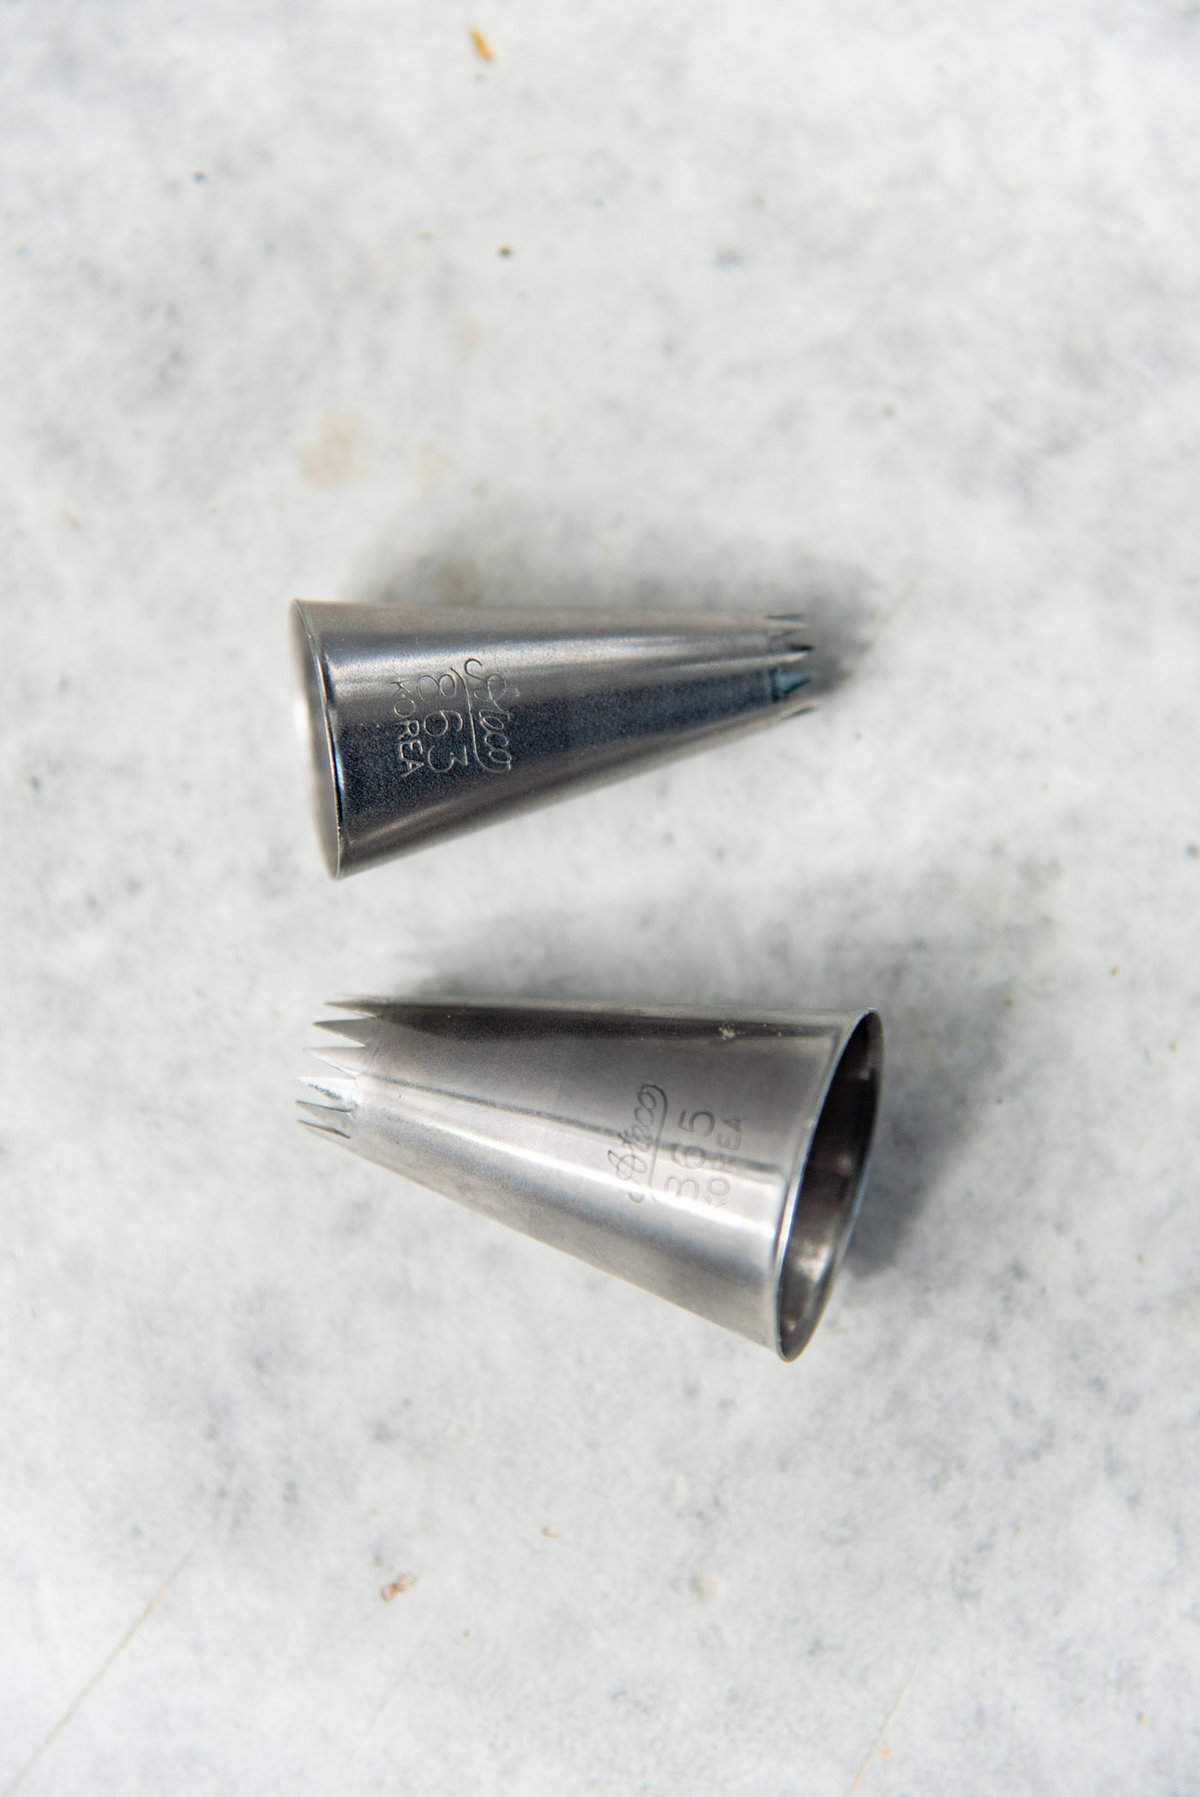 Two french star piping tips with different sizes. 